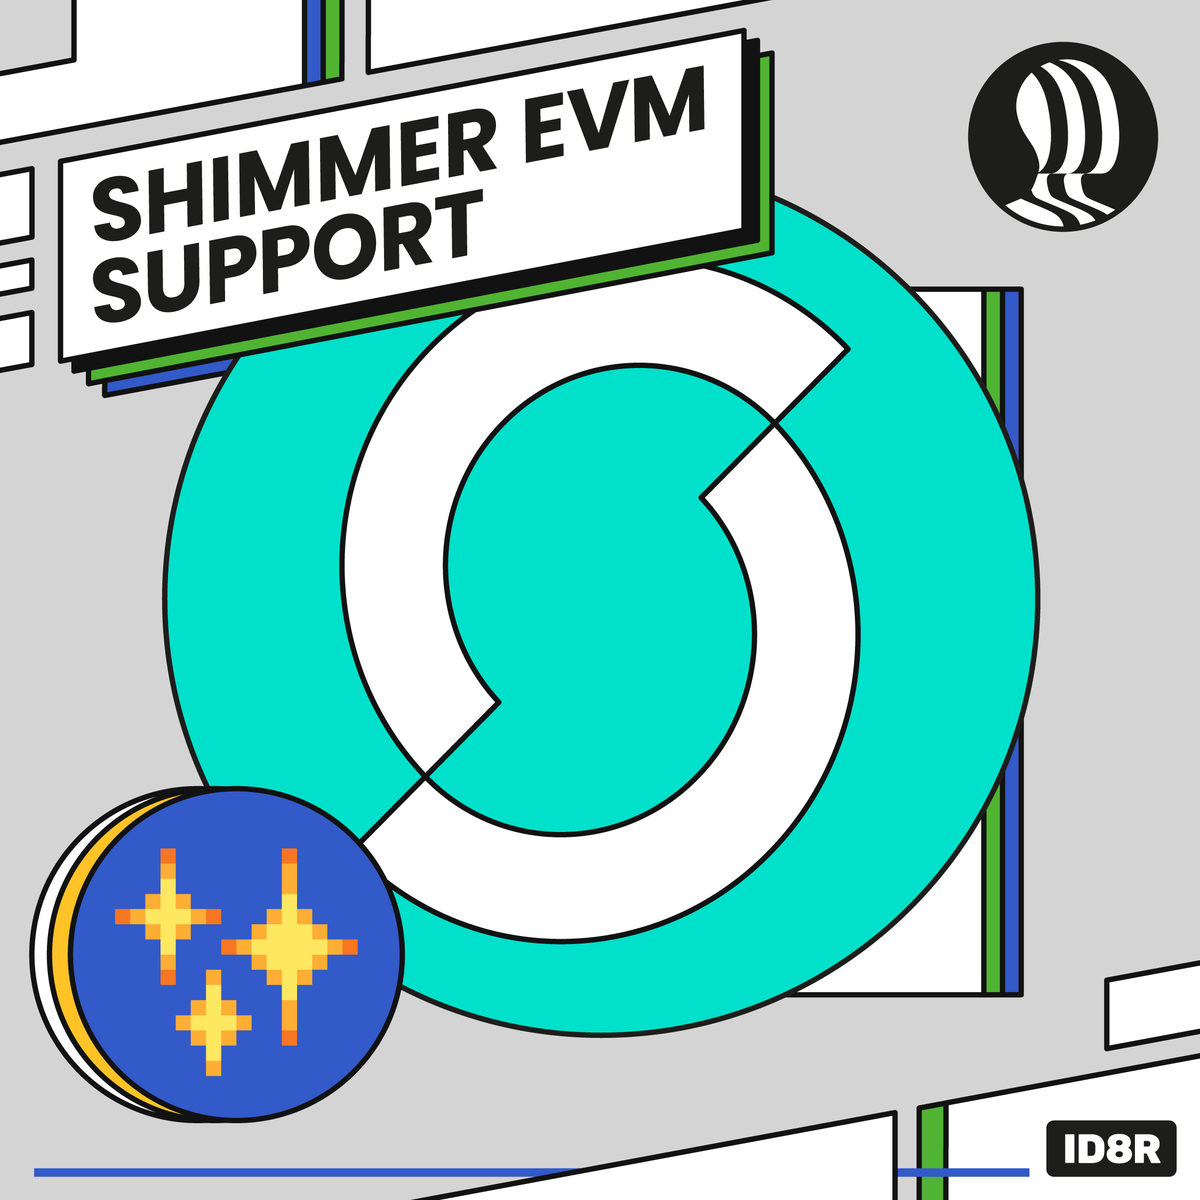 We added @shimmernet to ID8R!

Now your favourite #ShimmerEVM NFT collections can be personalised for sharing. @RustyRobotCC, @iotabots, OG/Lil' Apes, & more (incl. from @MagicSeaDEX). Thanks to @HAVN_network for the Tangle connectivity ✨

Check it out @ app.id8r.com/shimmer